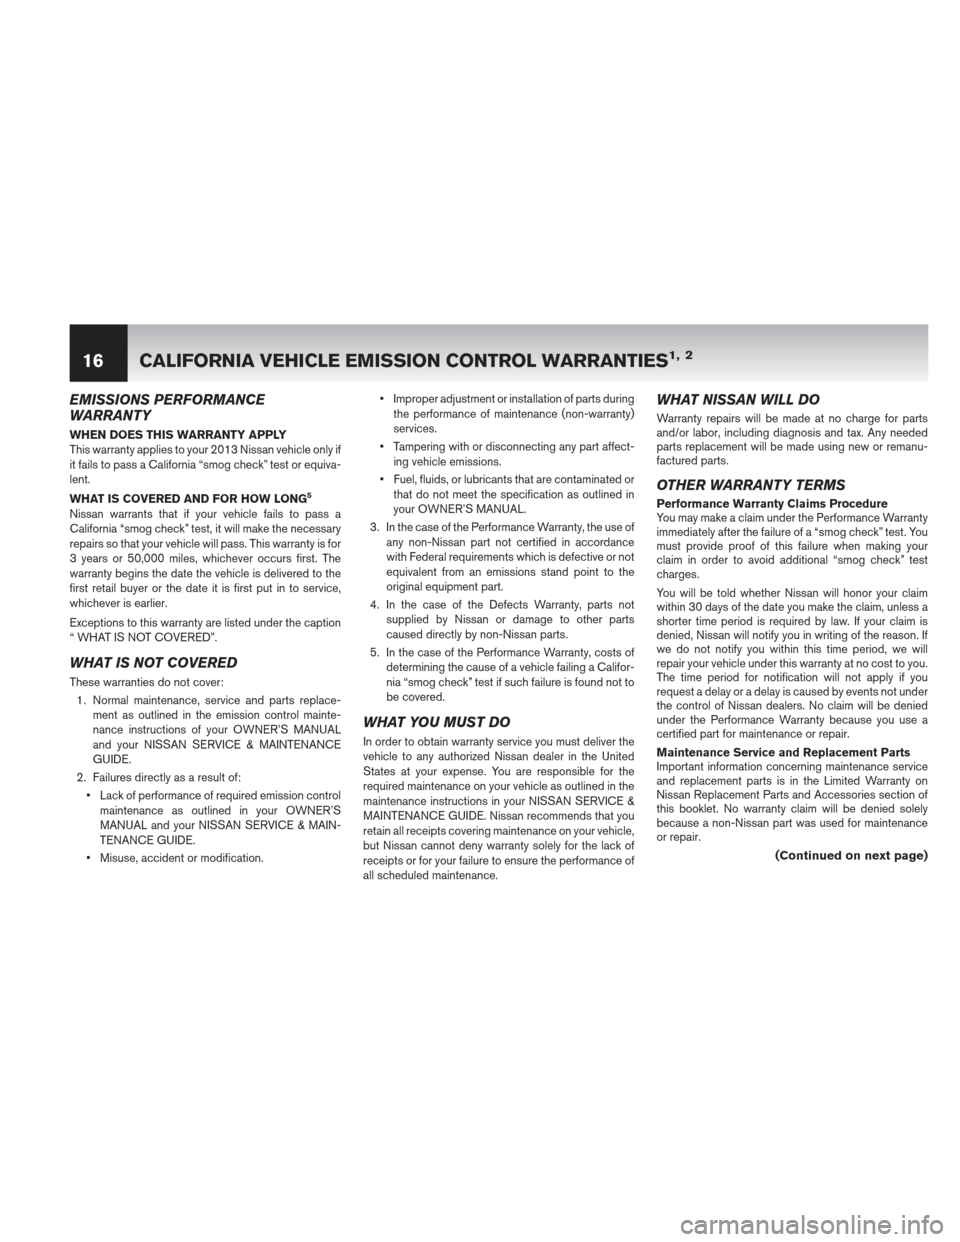 NISSAN QUEST 2013 RE52 / 4.G Warranty Booklet EMISSIONS PERFORMANCE
WARRANTY
WHEN DOES THIS WARRANTY APPLY
This warranty applies to your 2013 Nissan vehicle only if
it fails to pass a California “smog check” test or equiva-
lent.
WHAT IS COVE